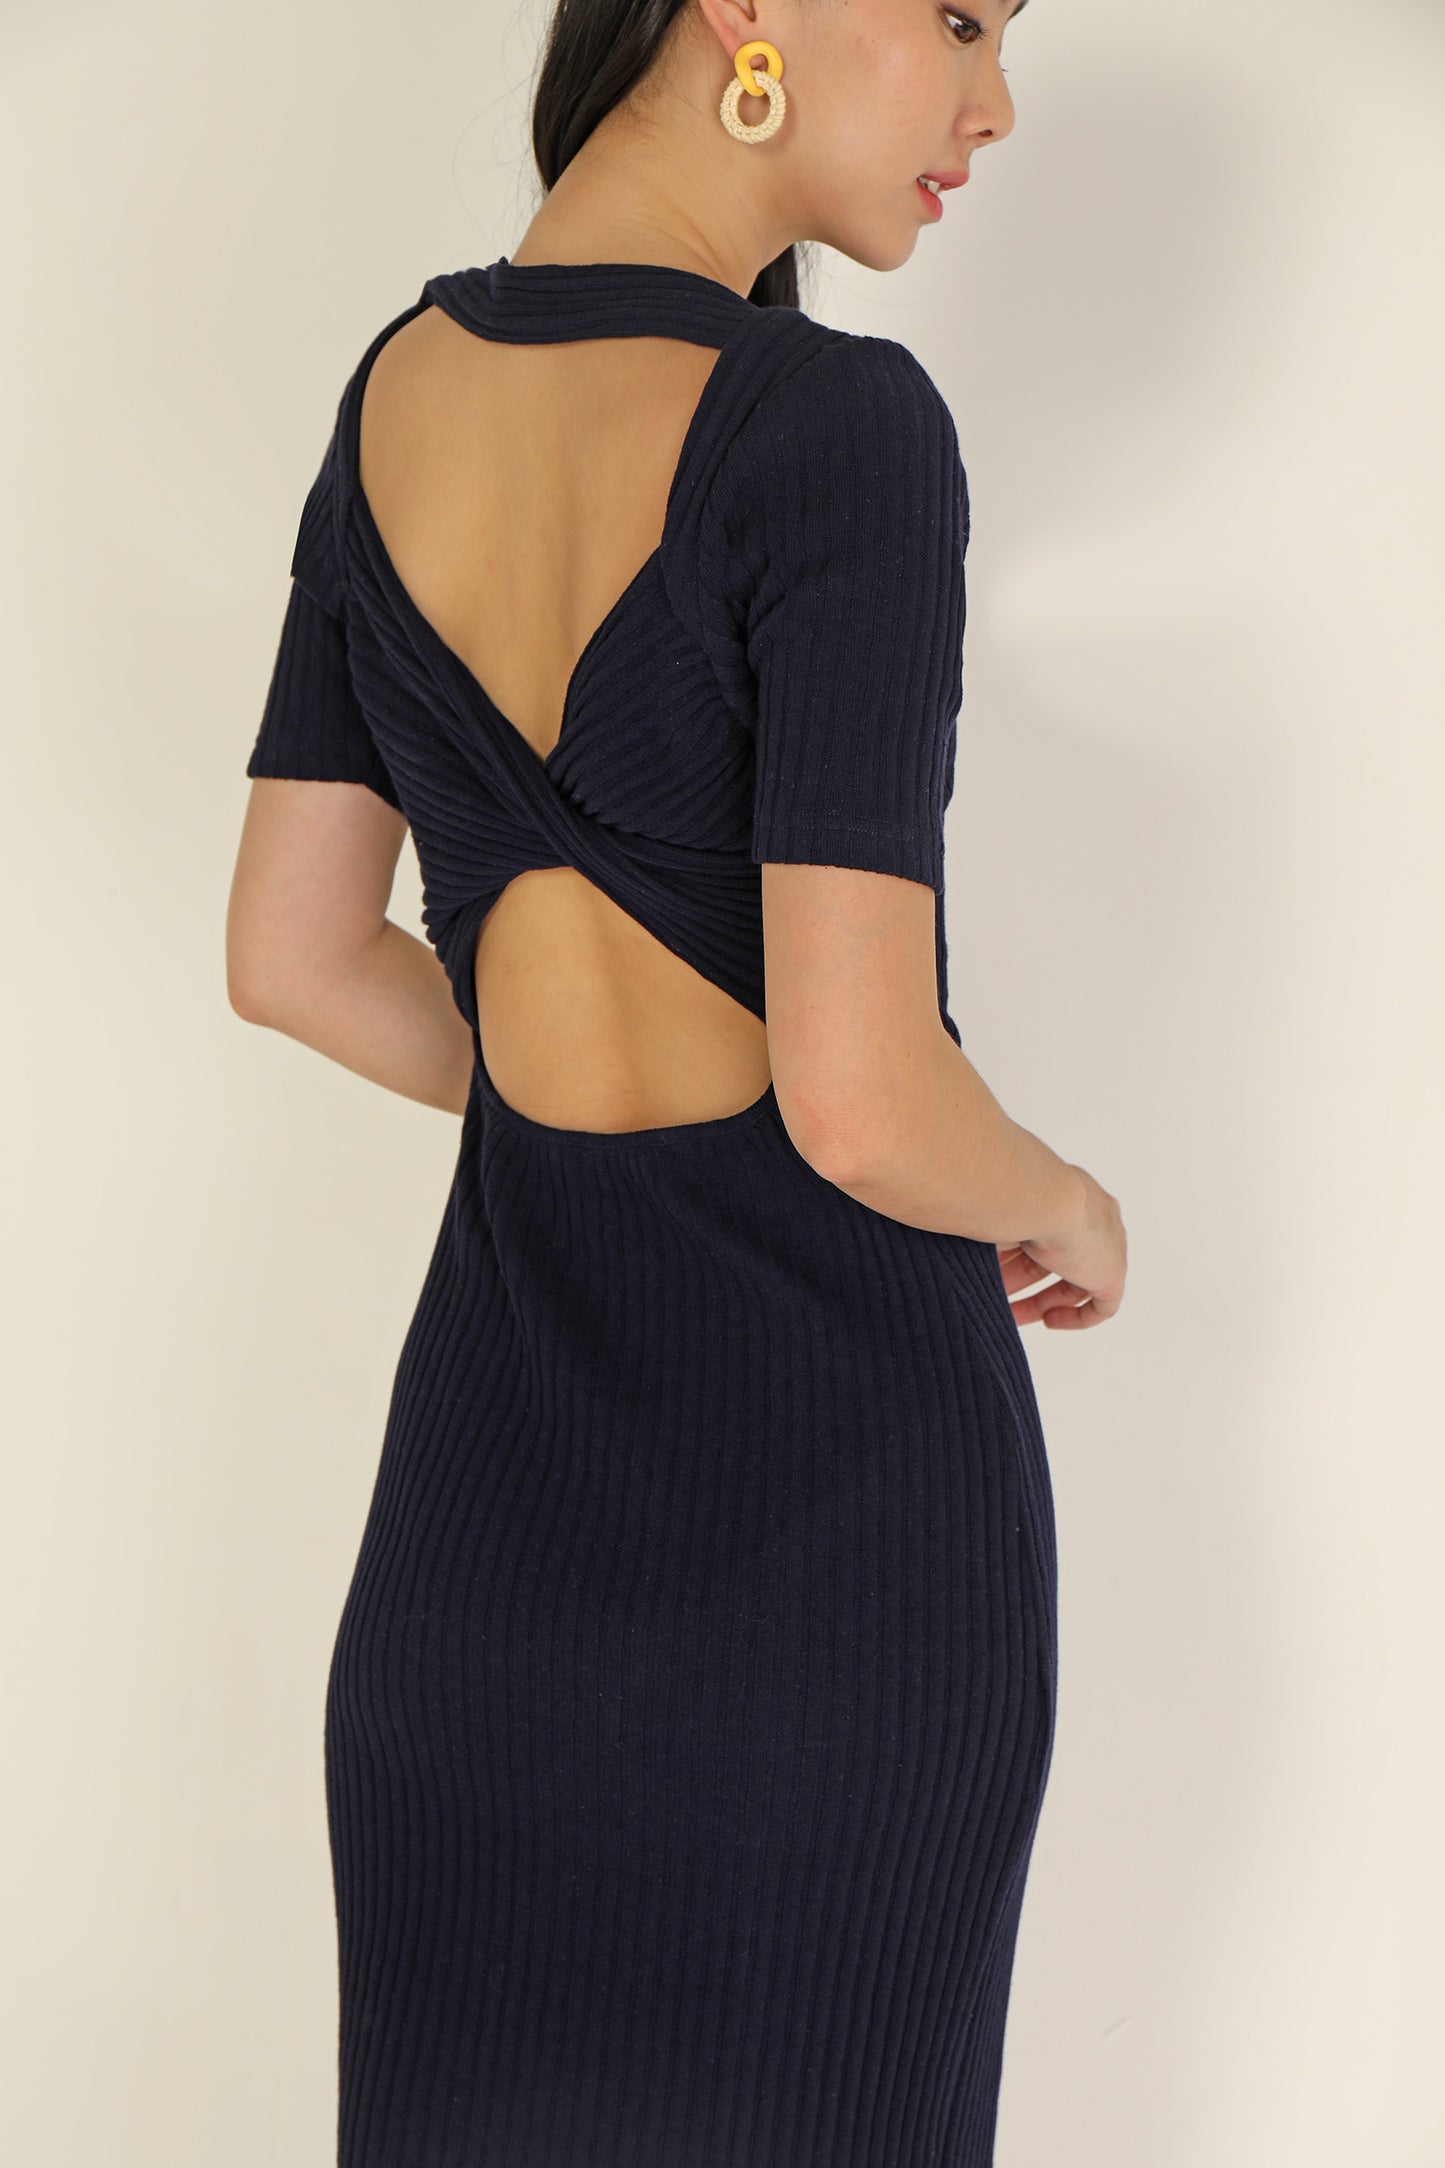 Donna Ribbed Cotton Dress